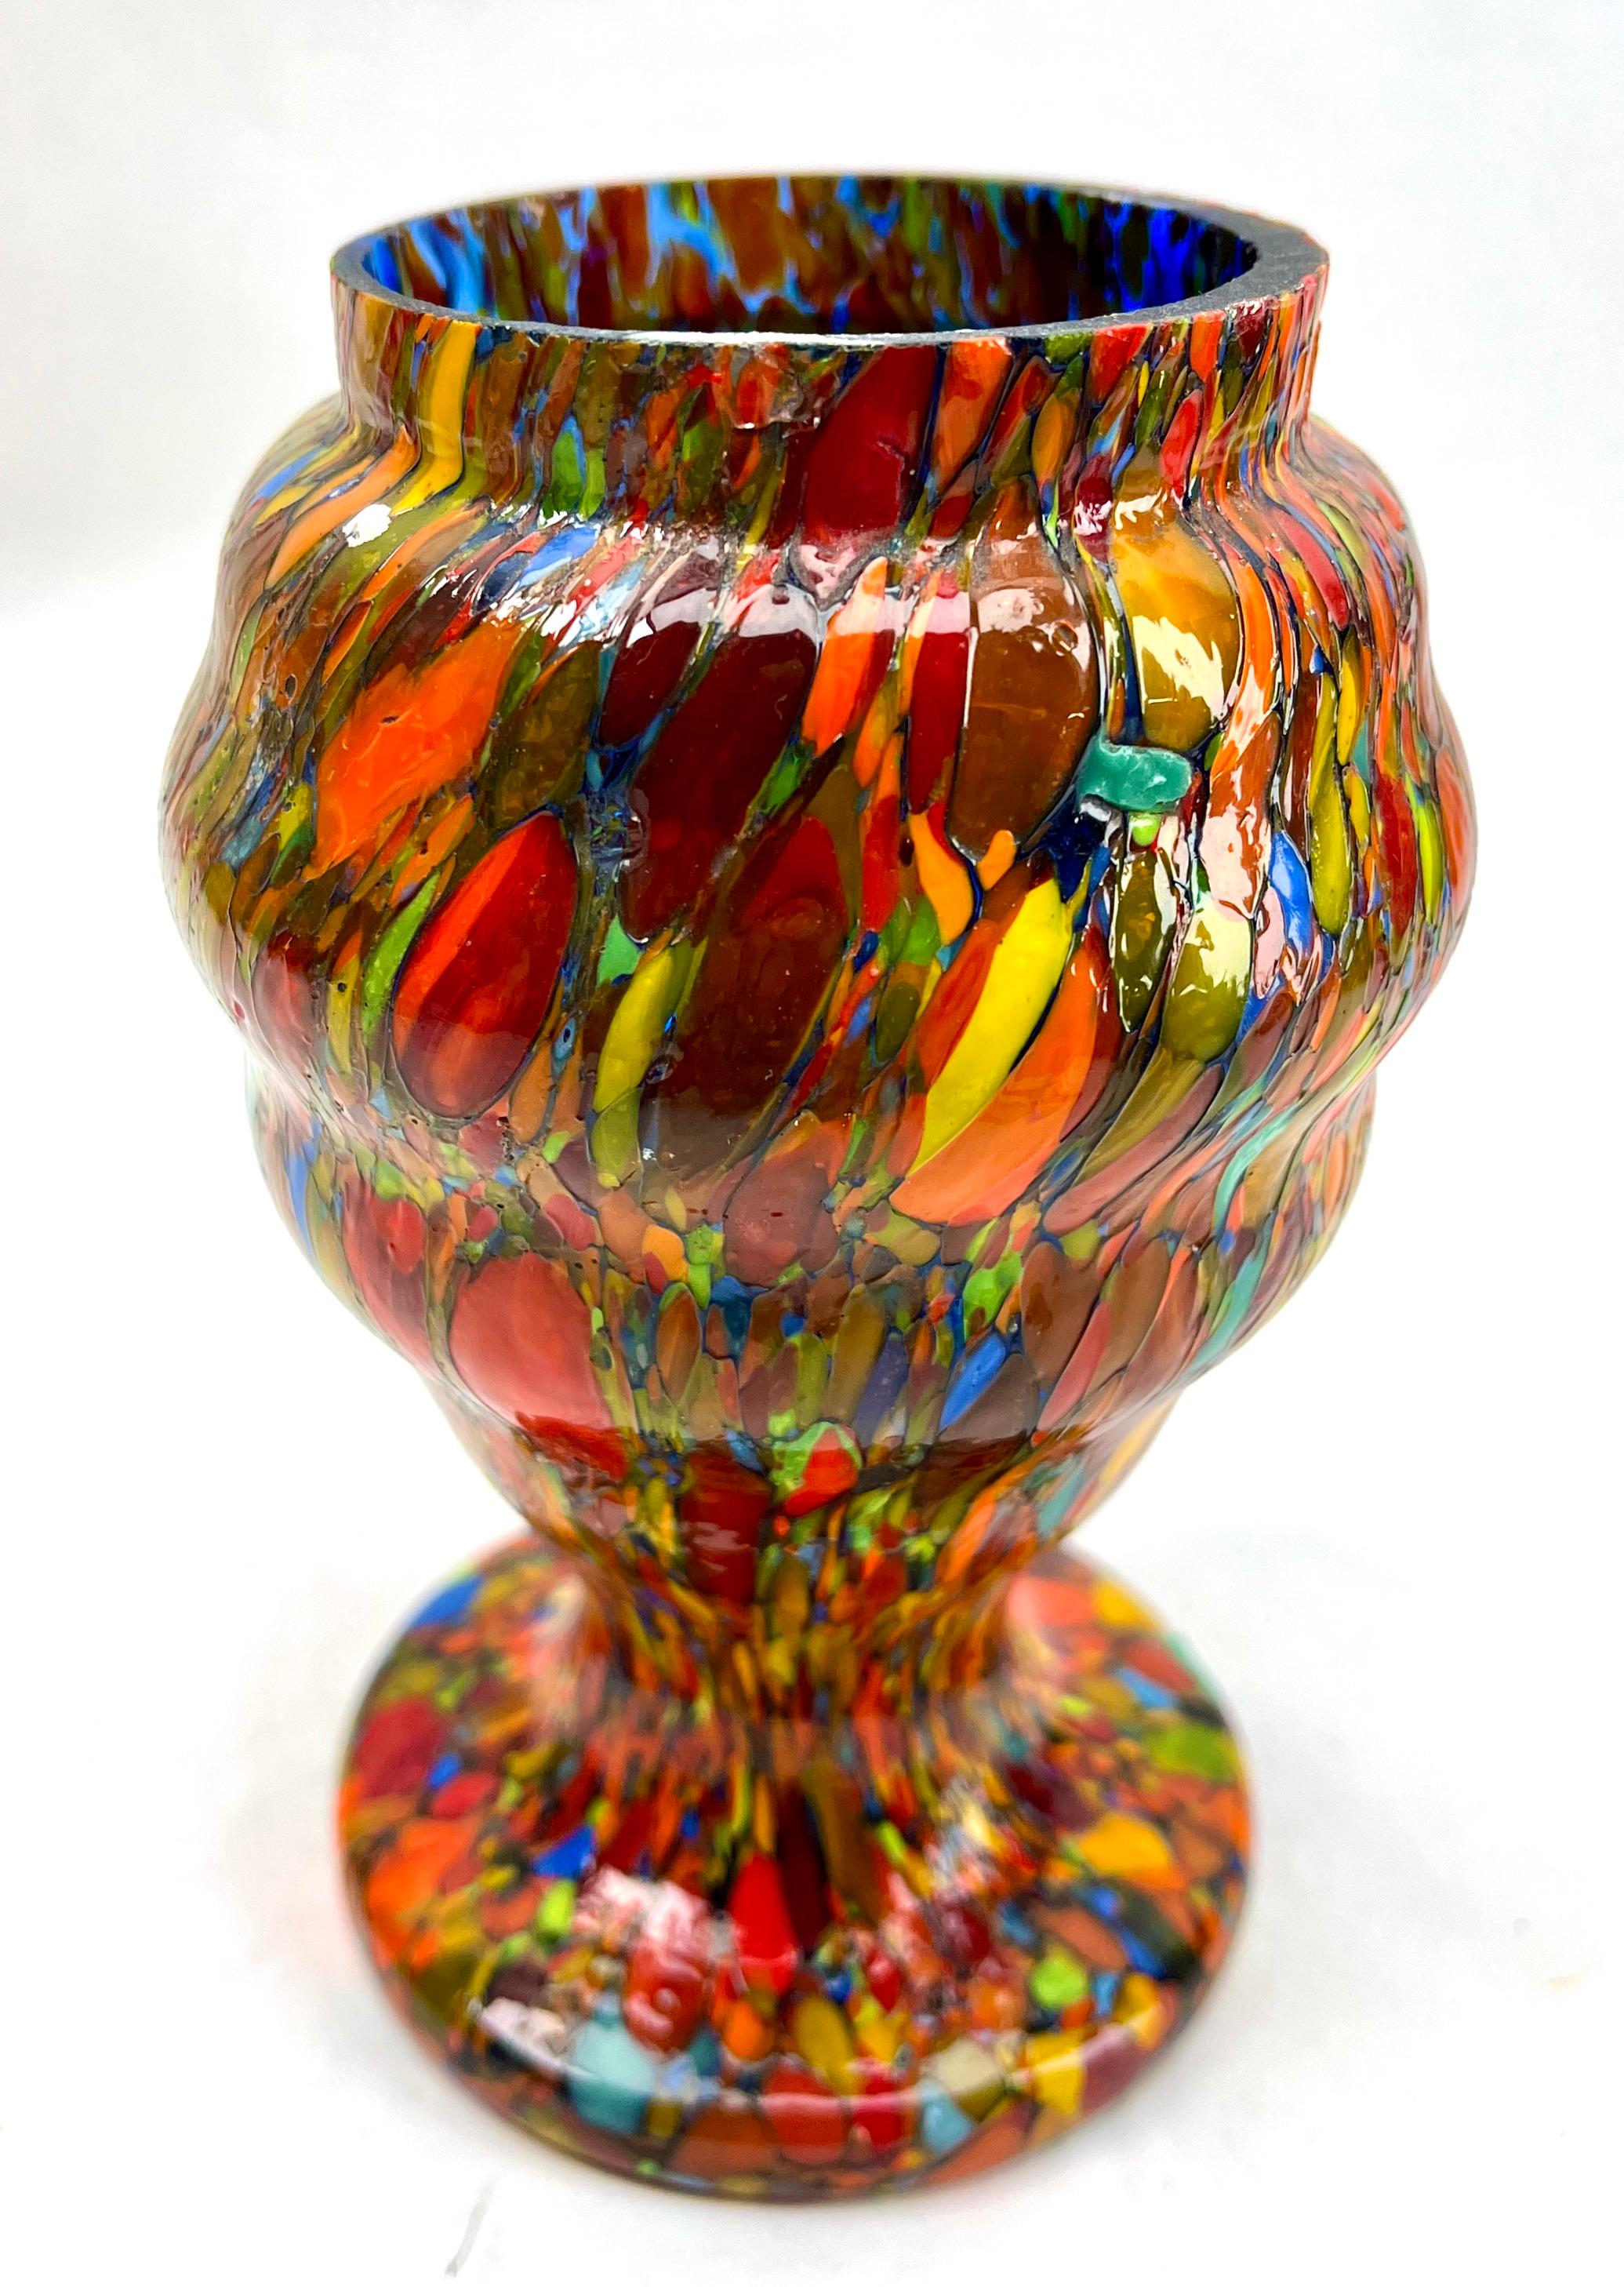 Dramatic multi color decor, in hand blown splatter glass vase in the Art Deco style. This design for vases is often called 'Pique fleurs' or 'rose-bowl' and is supplied with a fitted metal grille to support stems in an arrangement. 

Special color